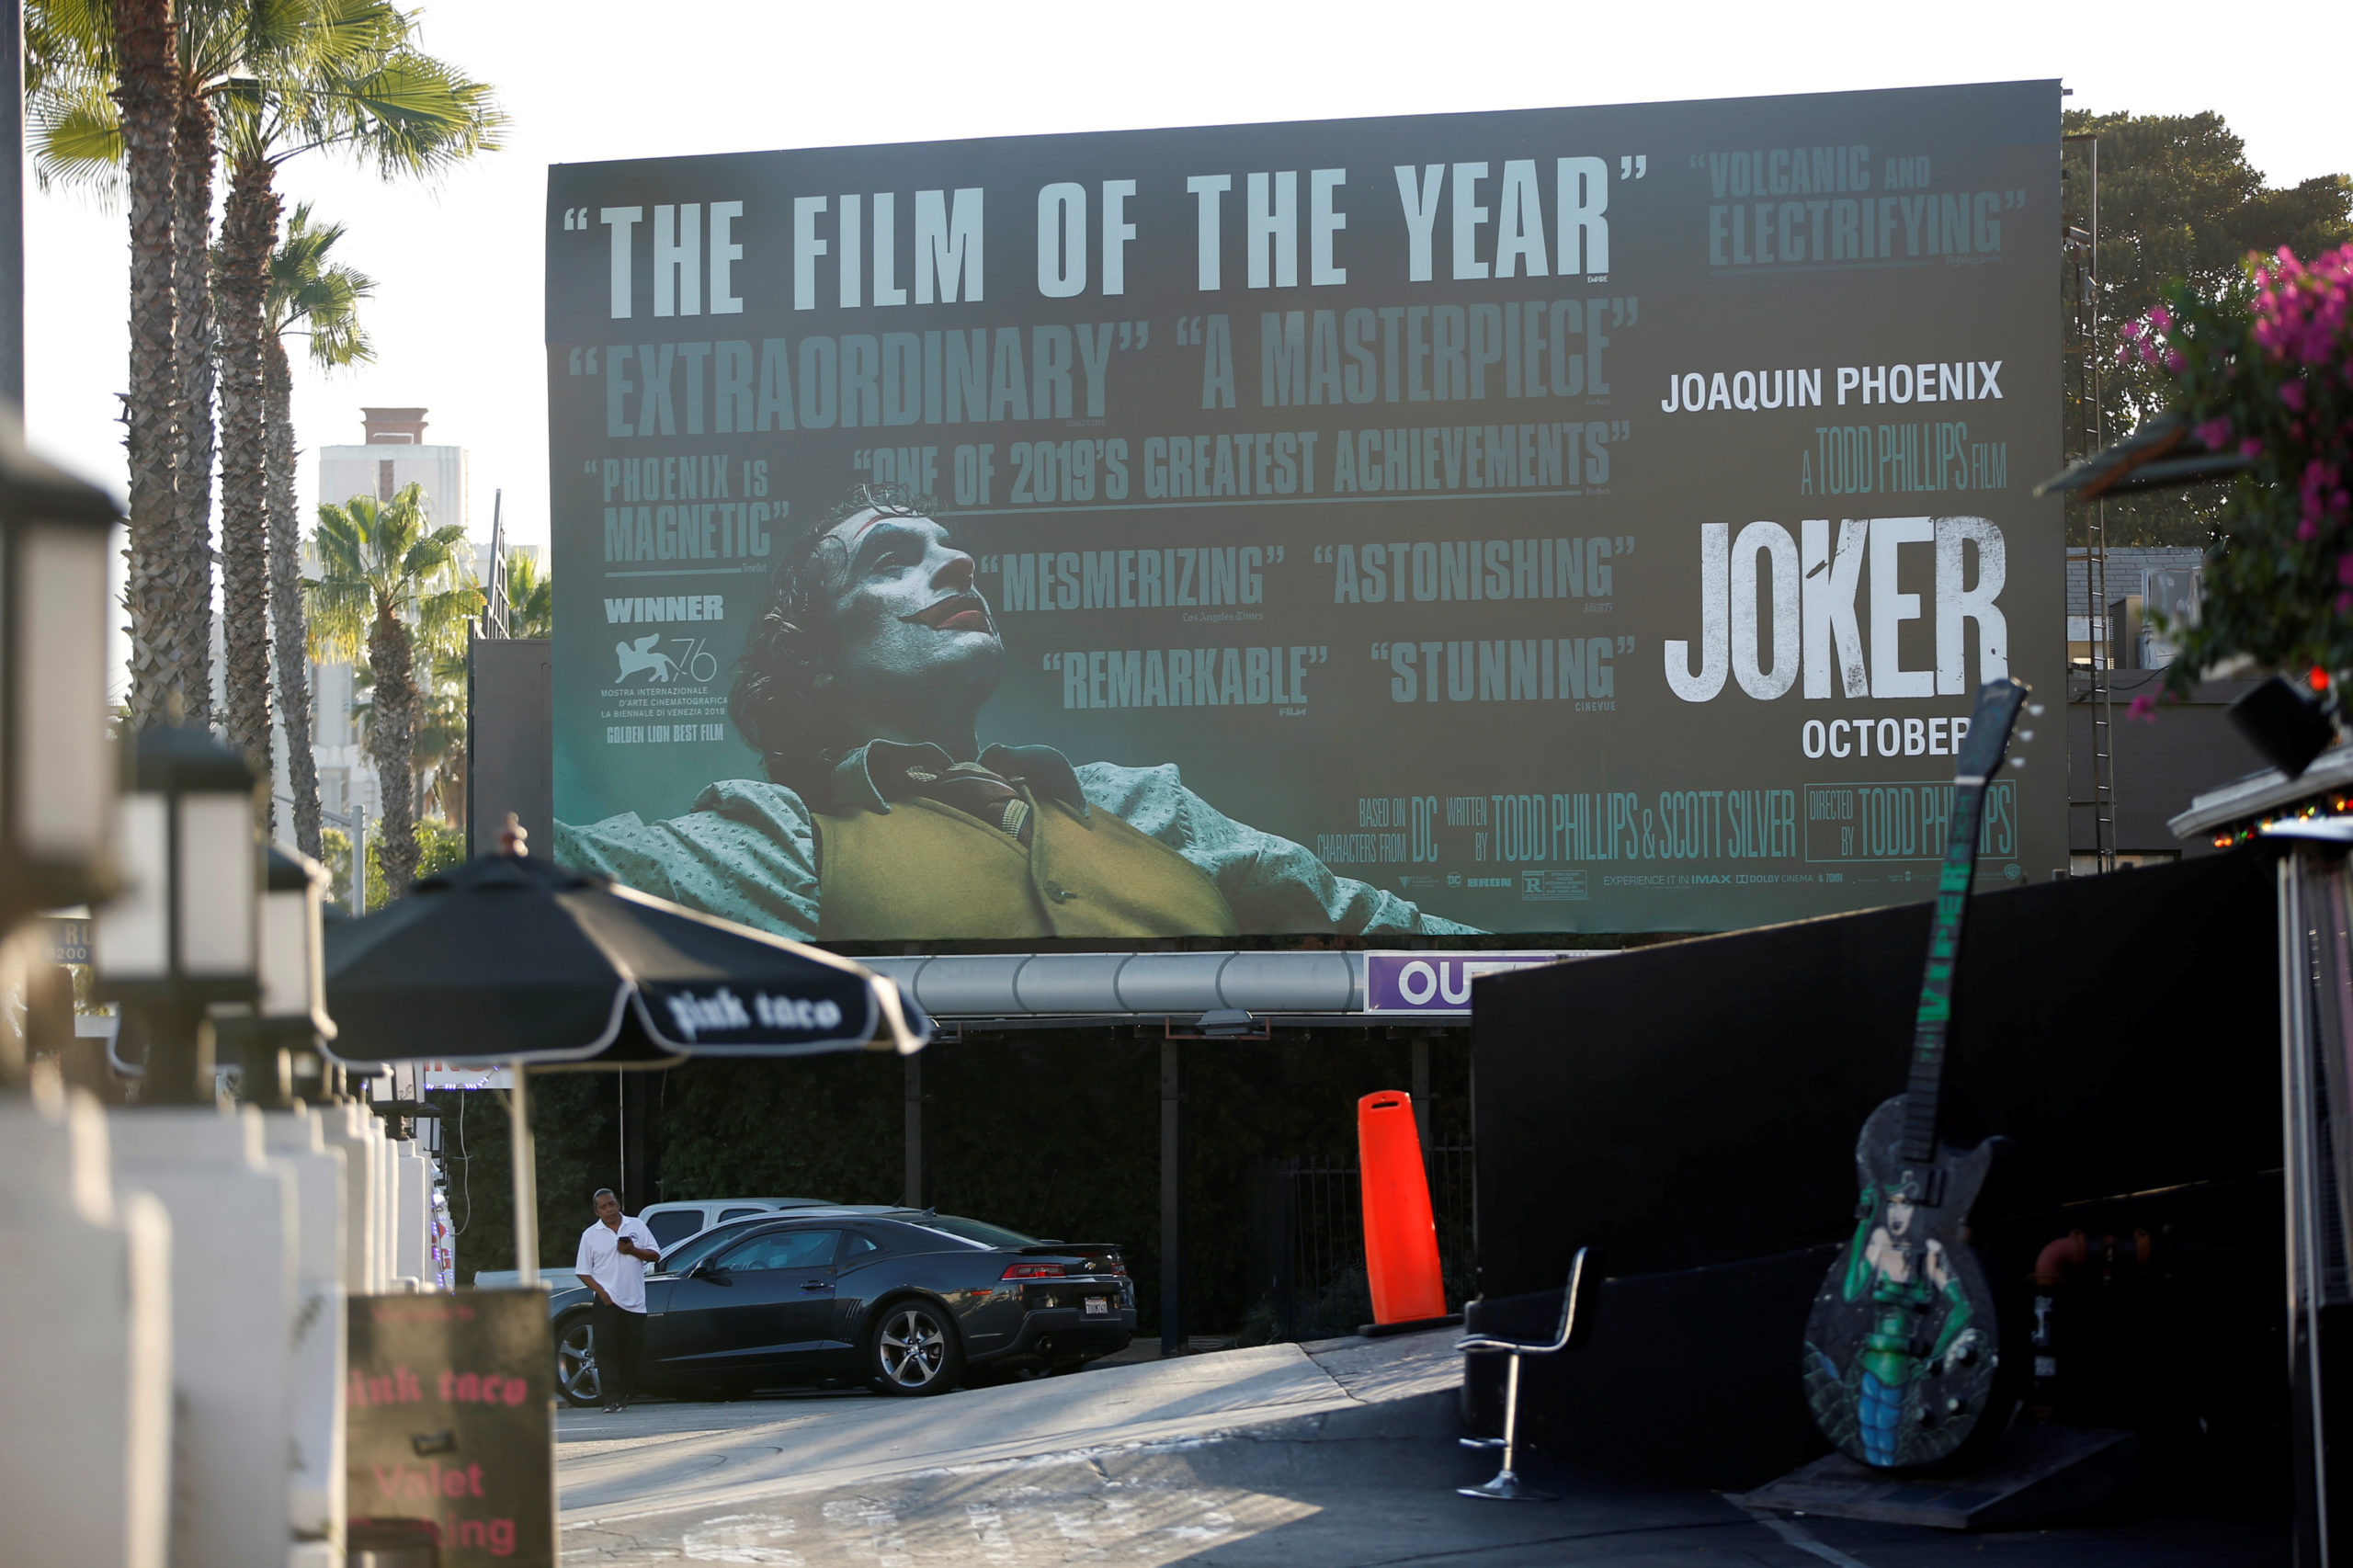 A billboard advertising the film "Joker" is pictured in Los Angeles, California, U.S., October 2, 2019. REUTERS/Mario Anzuoni